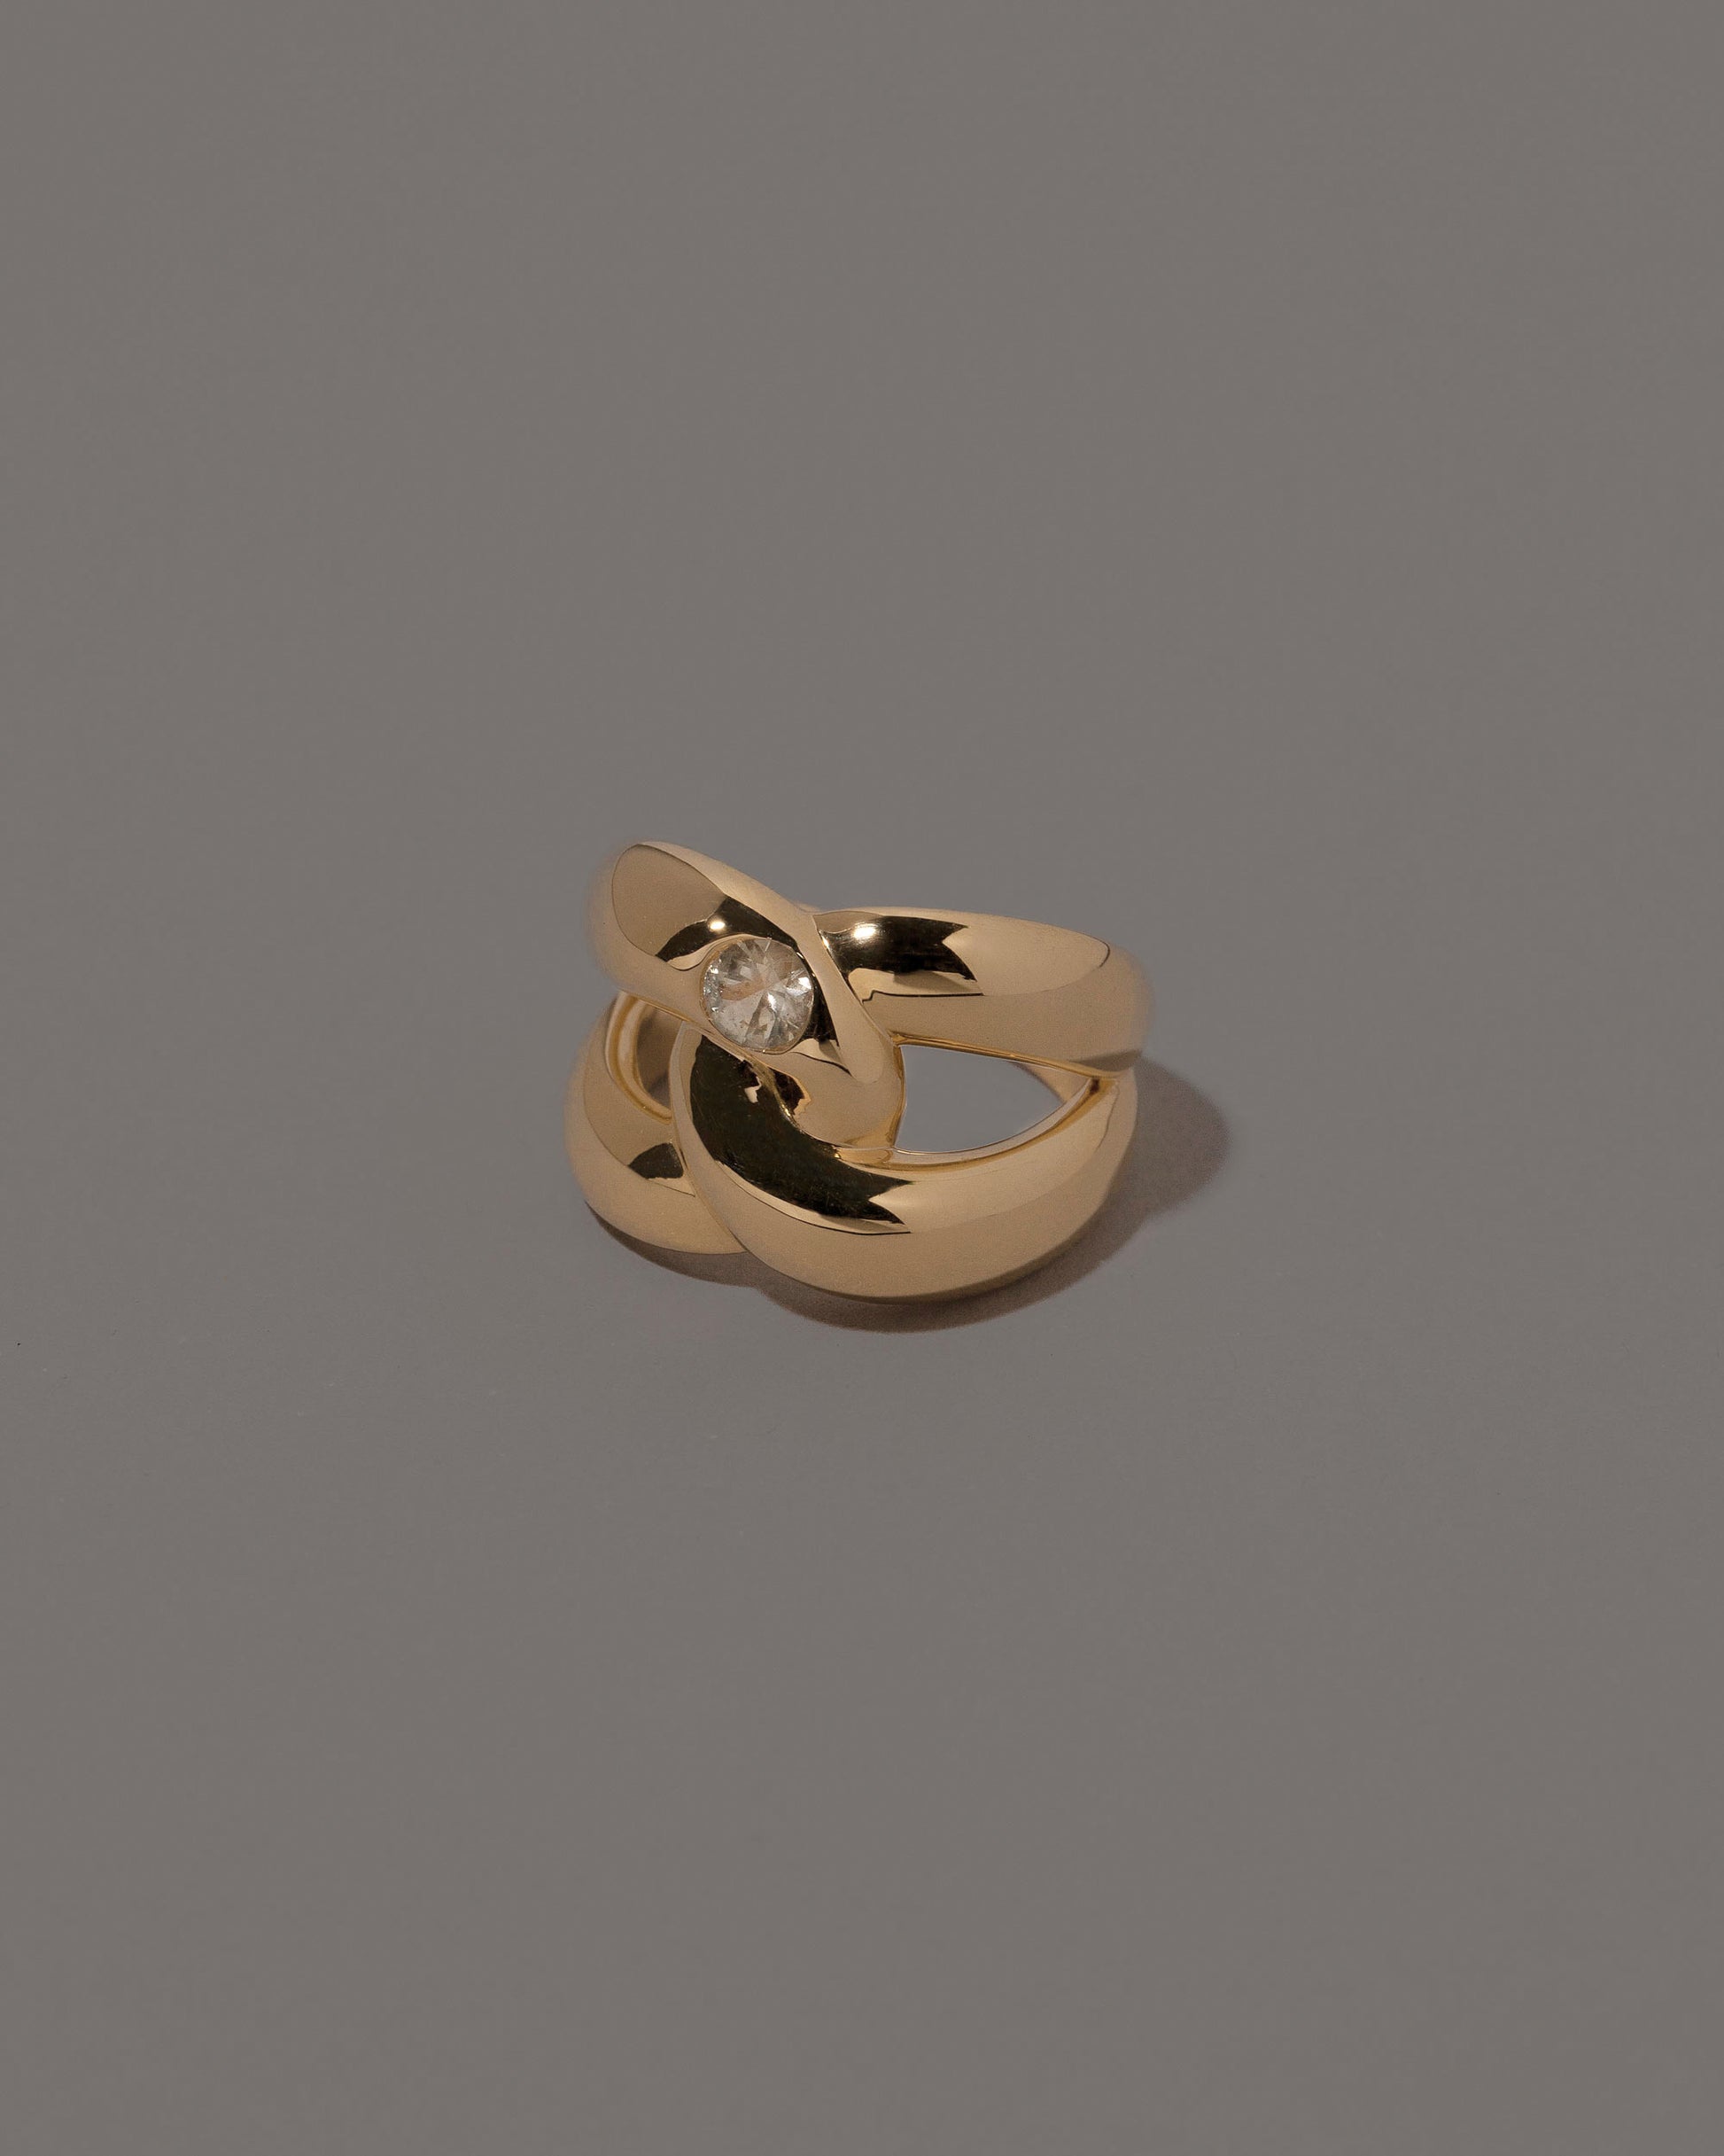 View from the side of the One Ring on grey color background.